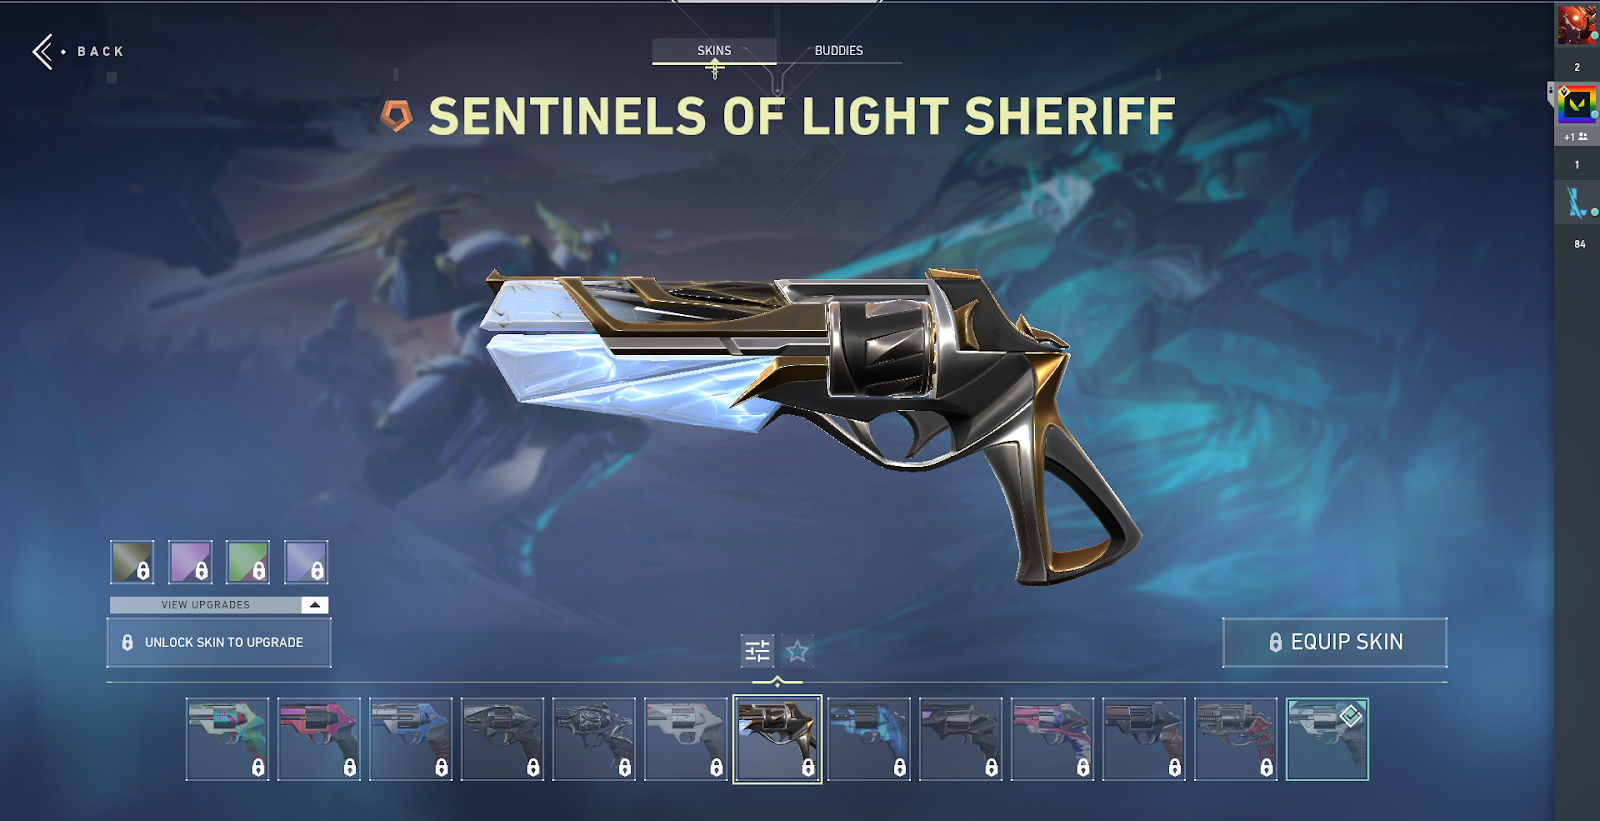 The Sentinels of Light skin for the Sheriff features a white, feather-like design along the barrel 